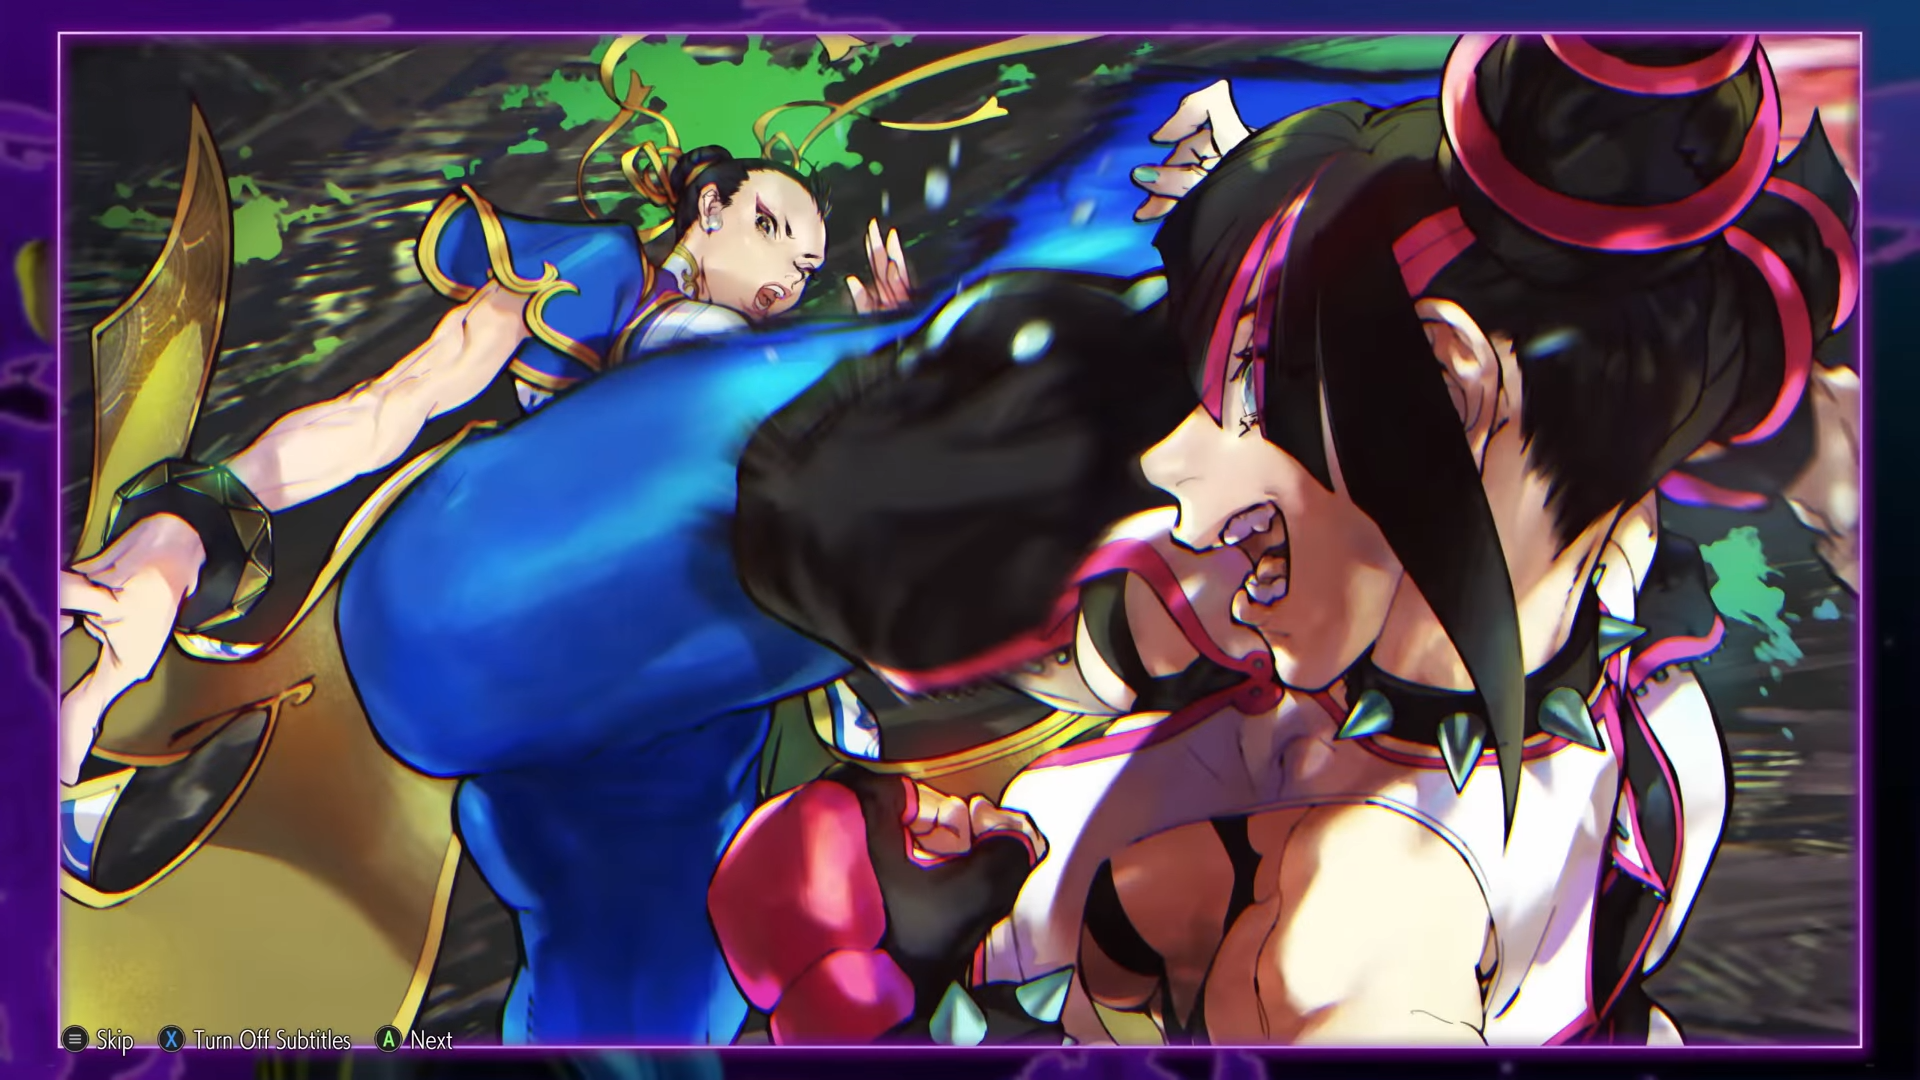 Street Fighter 6 DLC: Release window, price & confirmed characters -  Charlie INTEL